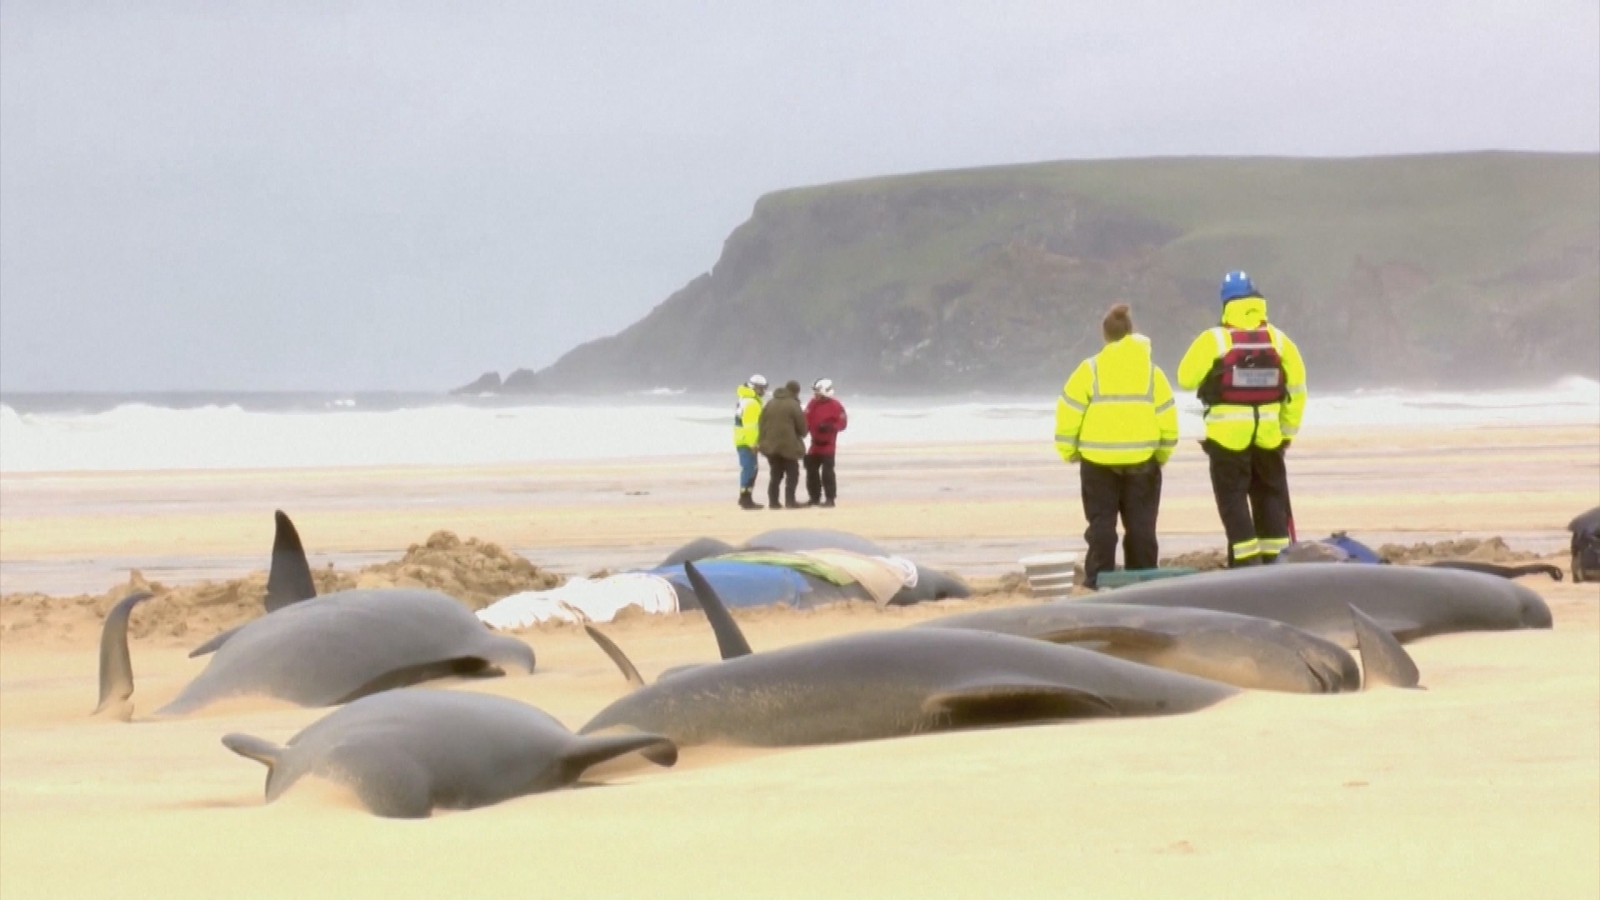 Entire pod of whales dies in worst mass whale stranding in Britain